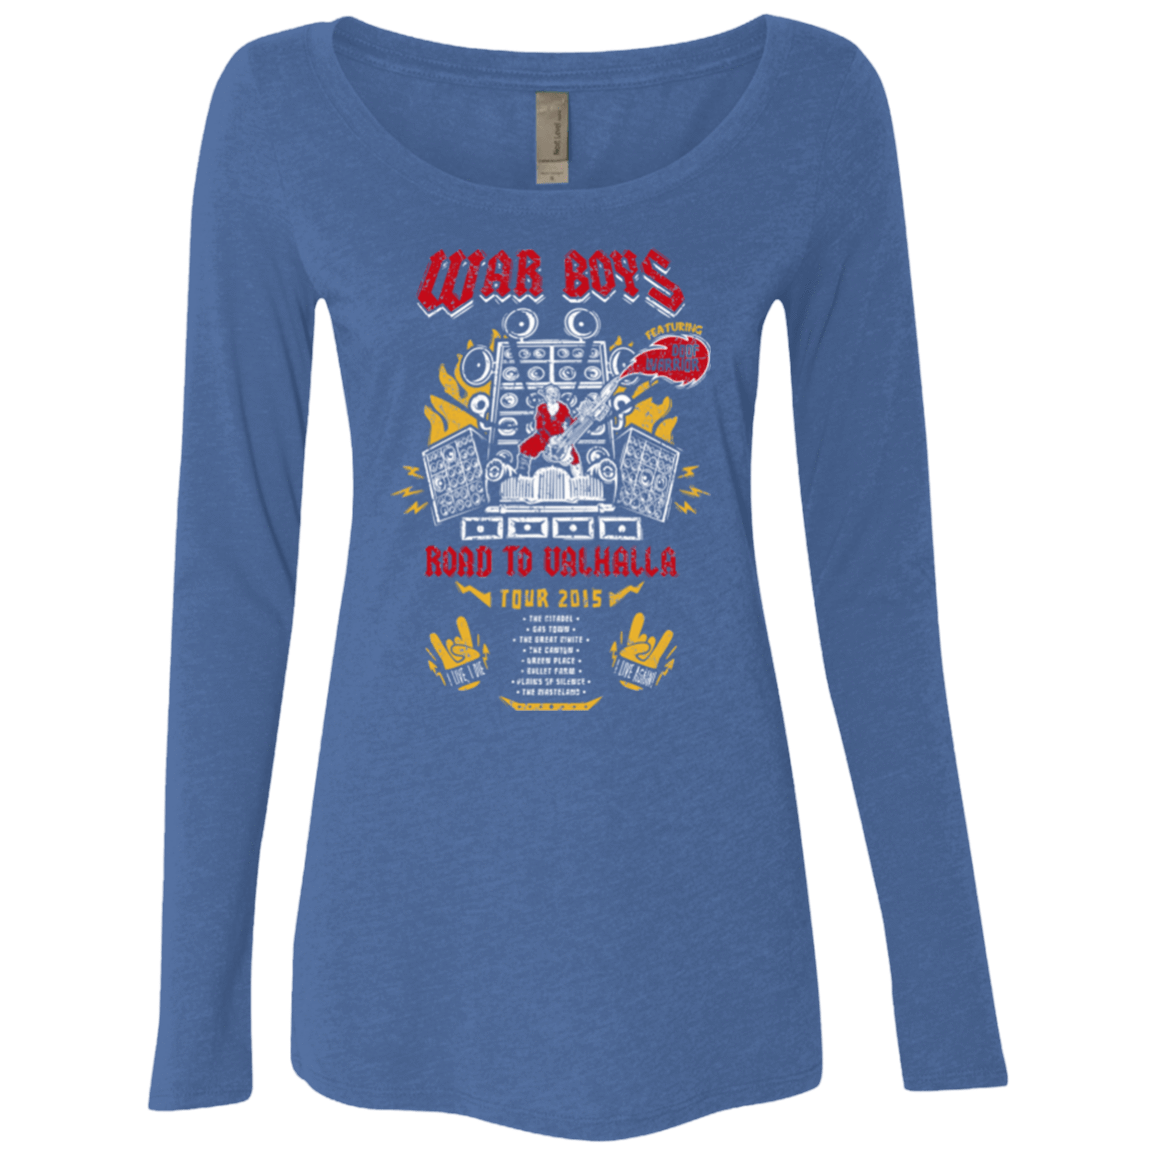 T-Shirts Vintage Royal / Small Road to Valhalla Tour Women's Triblend Long Sleeve Shirt